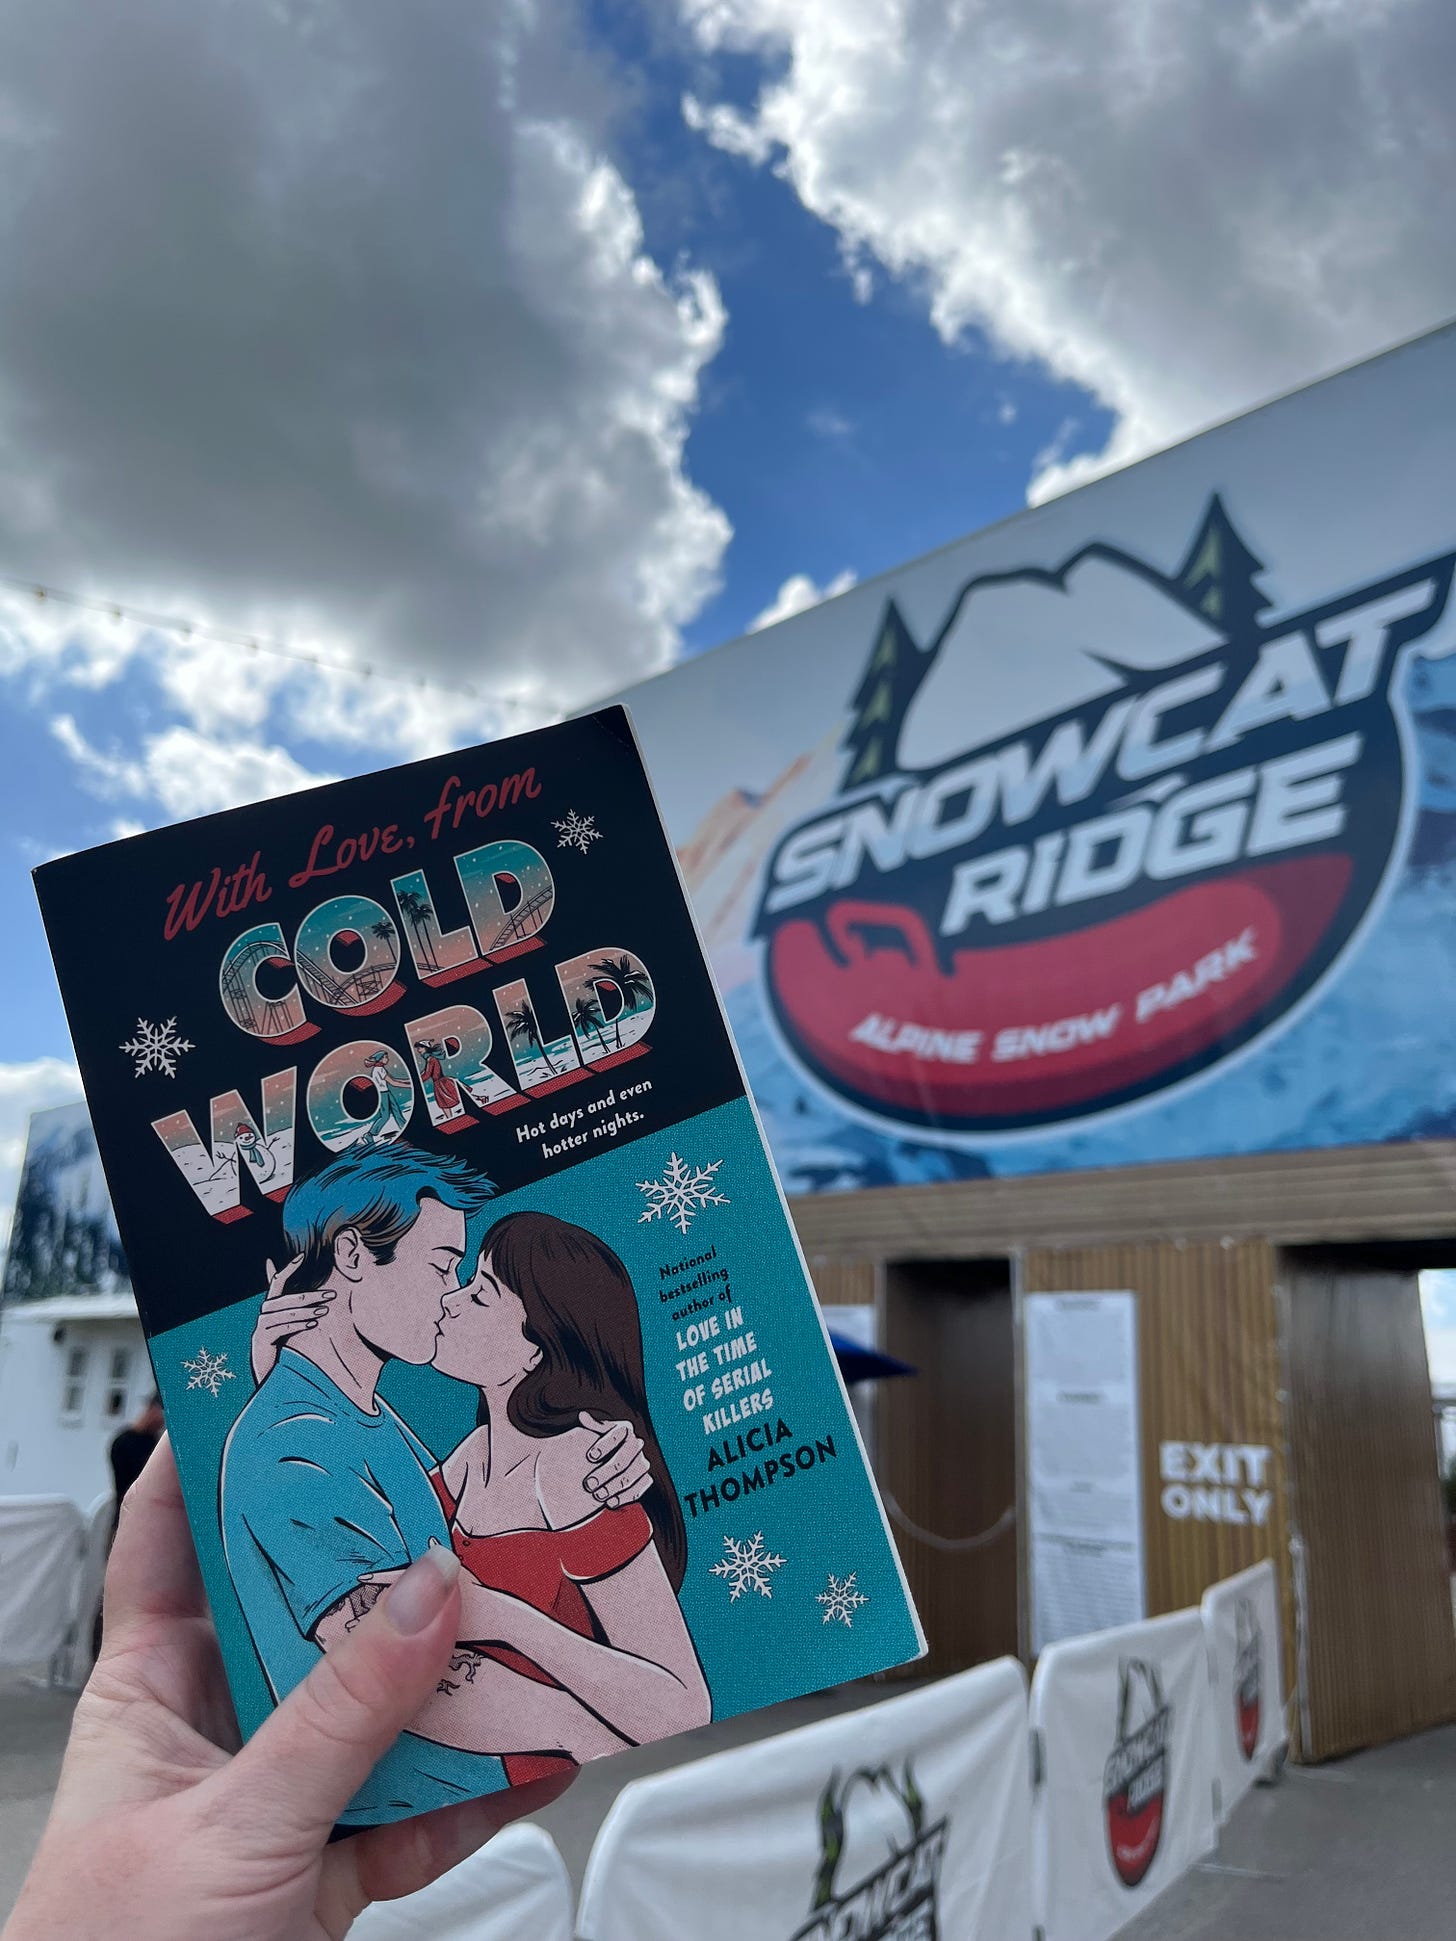 Picture of my hand holding up the teal cover copy of WITH LOVE, FROM COLD WORLD in front of the entrance to Snowcat Ridge Alpine Snow Park